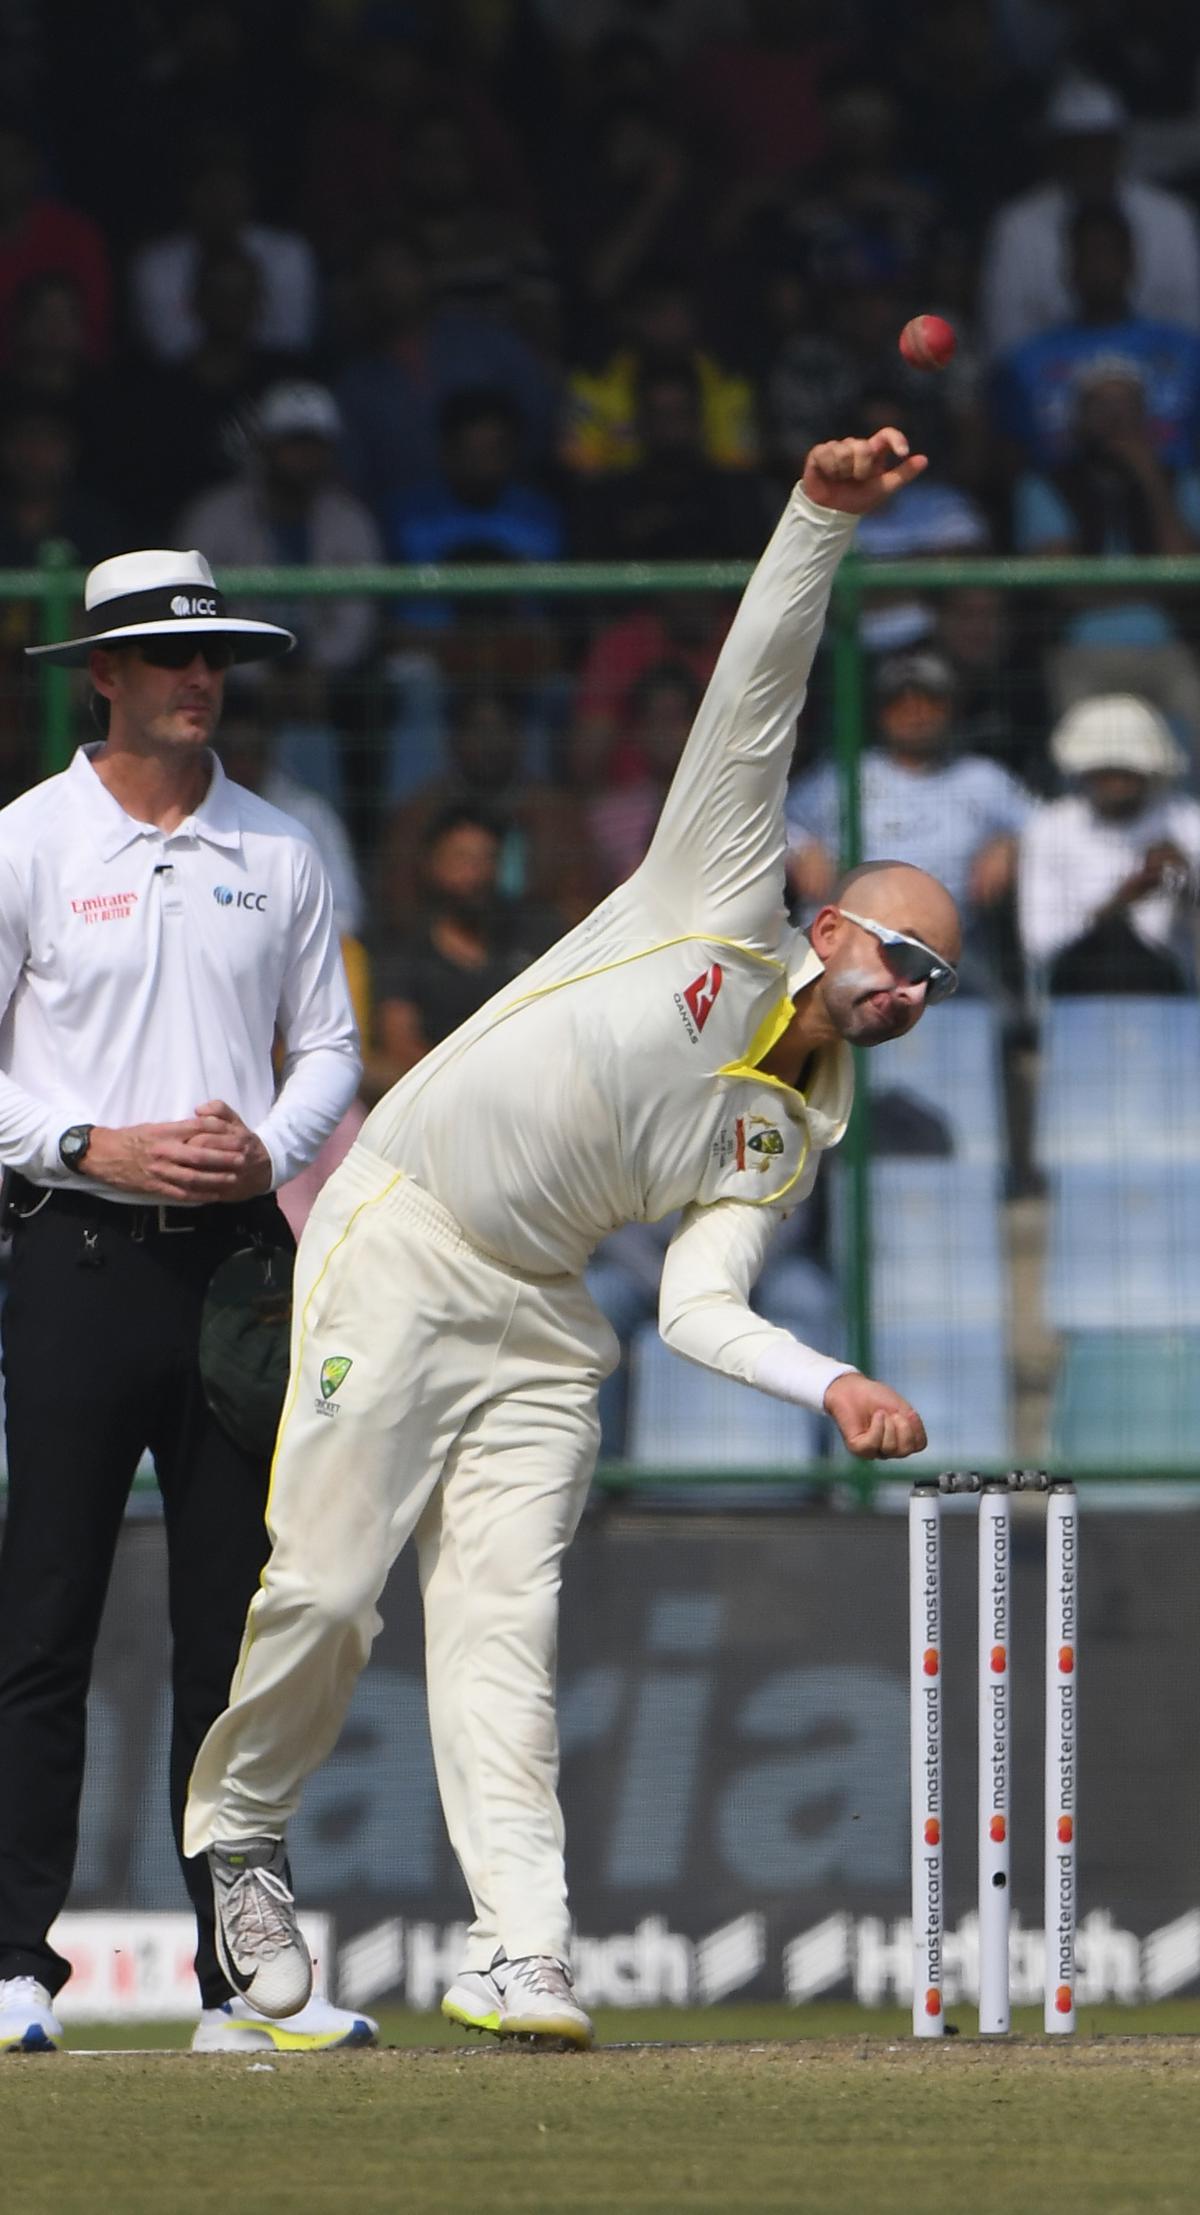 Nathan Lyon had the Indians in jitters with a five wicket haul.